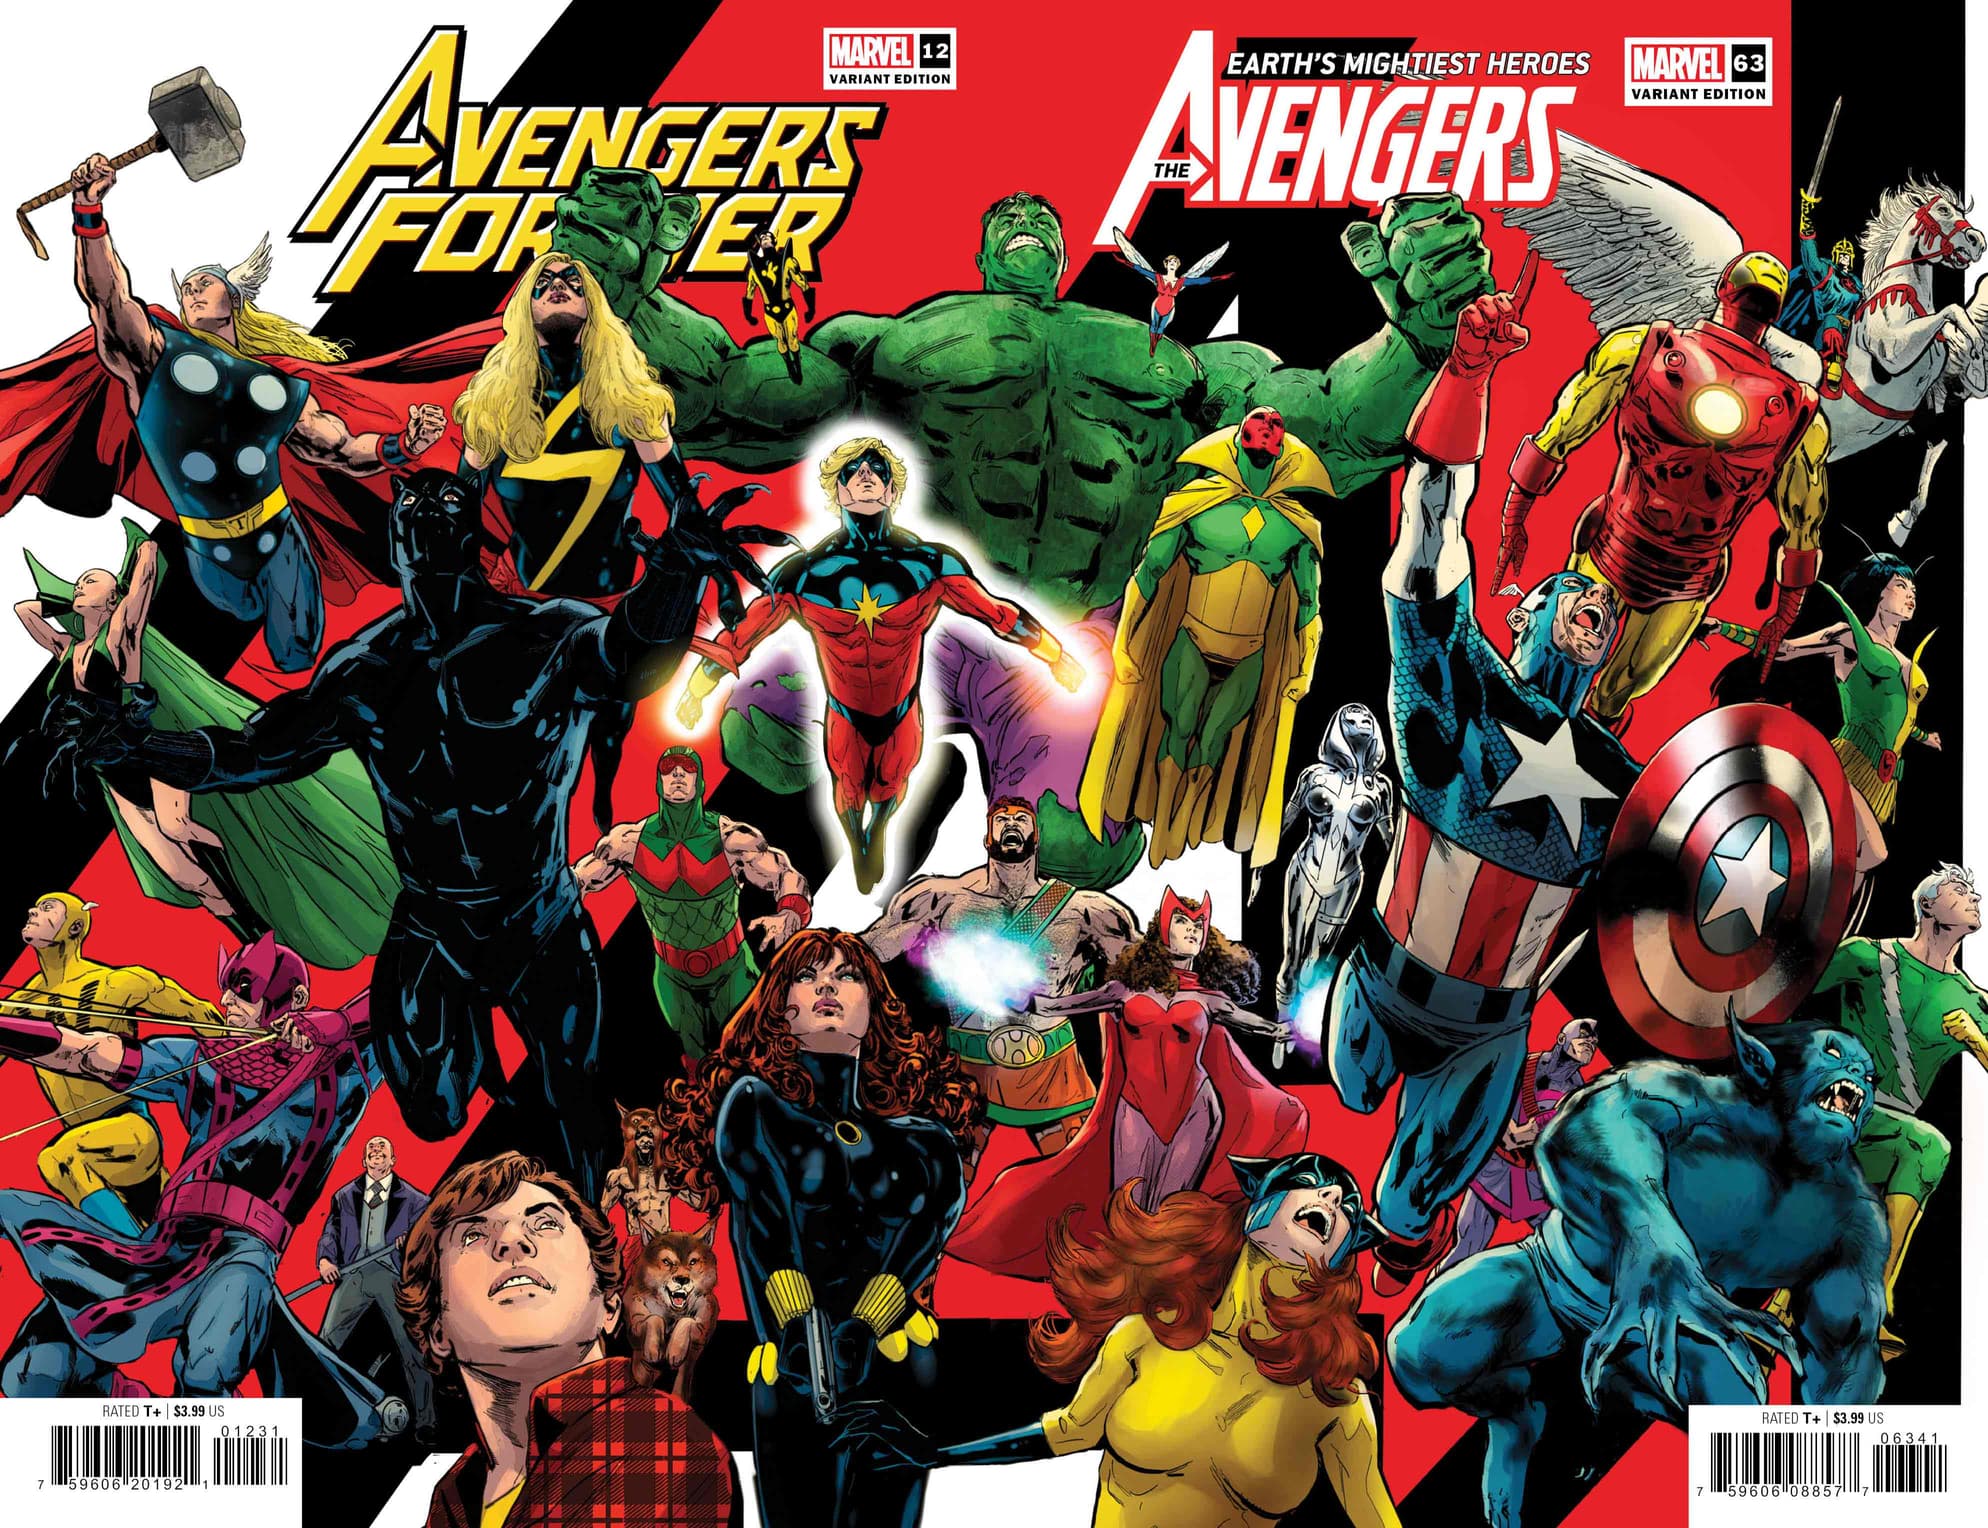 Check out Phil Jimenez's connecting variant covers for December's 'Avengers' #63 and 'Avengers Forever' #12, Part 2 and 3 of Jason Aaron’s 'Avengers Assemble' crossover!